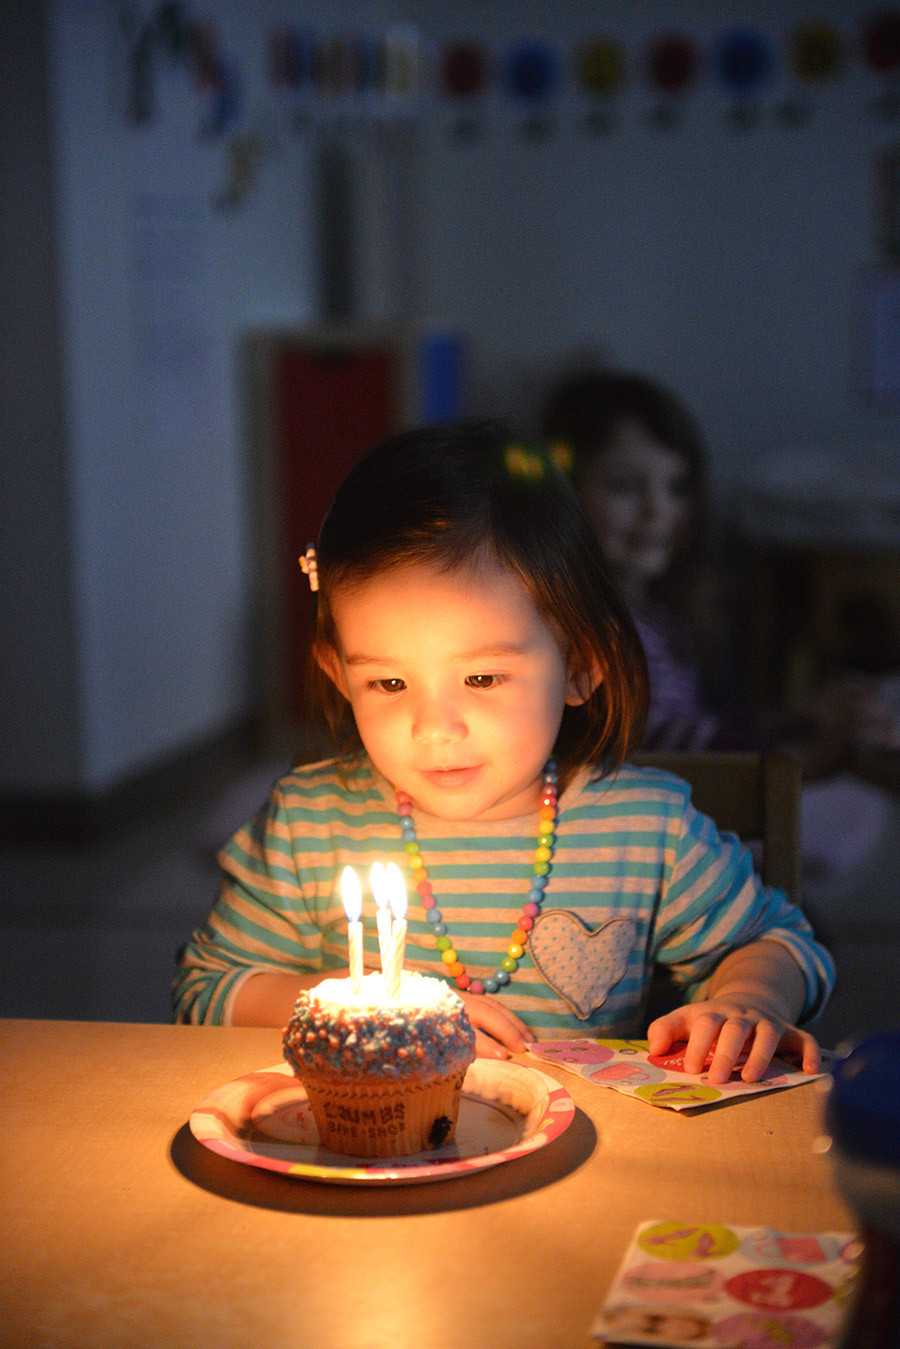 Kids Birthday Party Ideas Nyc
 2014 Guide The Best Birthday Parties For Kids In NYC